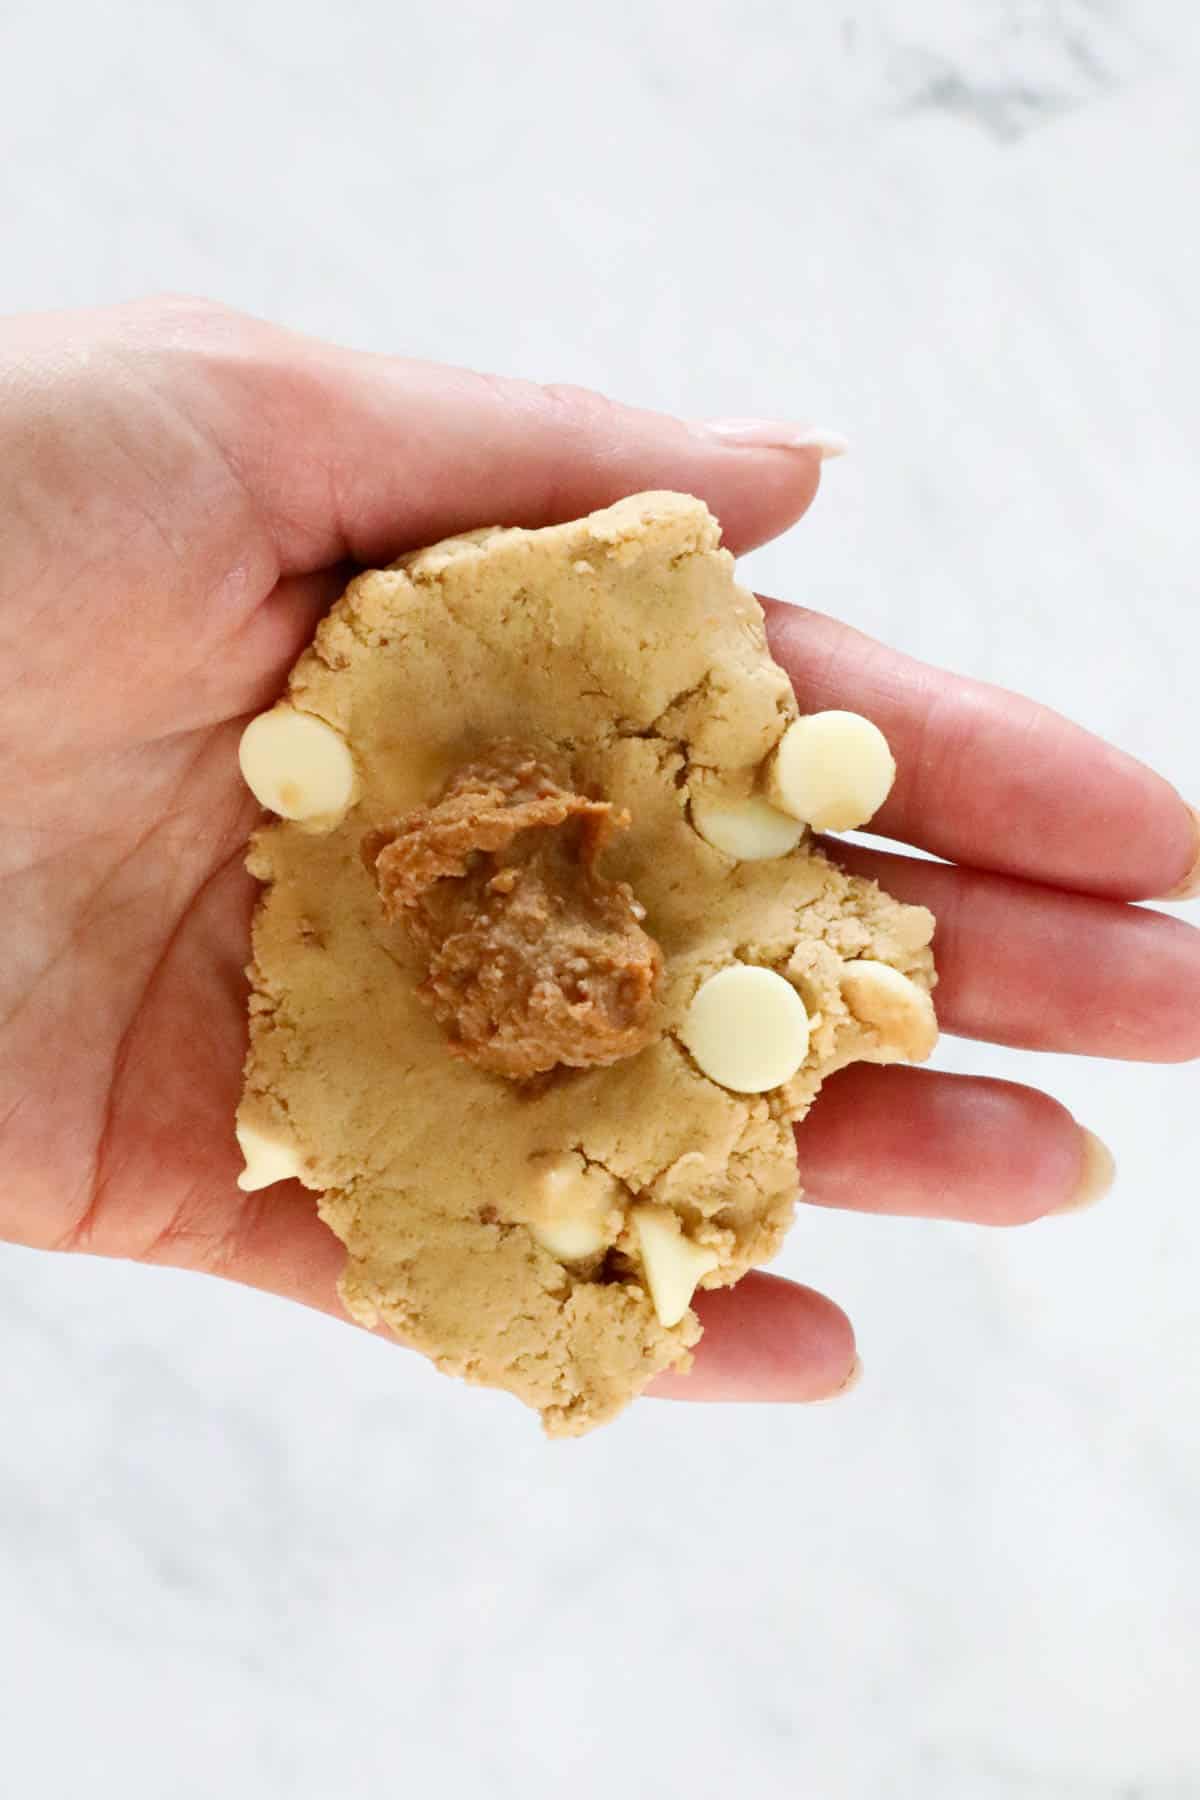 Cookie dough flattened on a palm of a hand, with a small piece of frozen Biscoff spread in the centre.